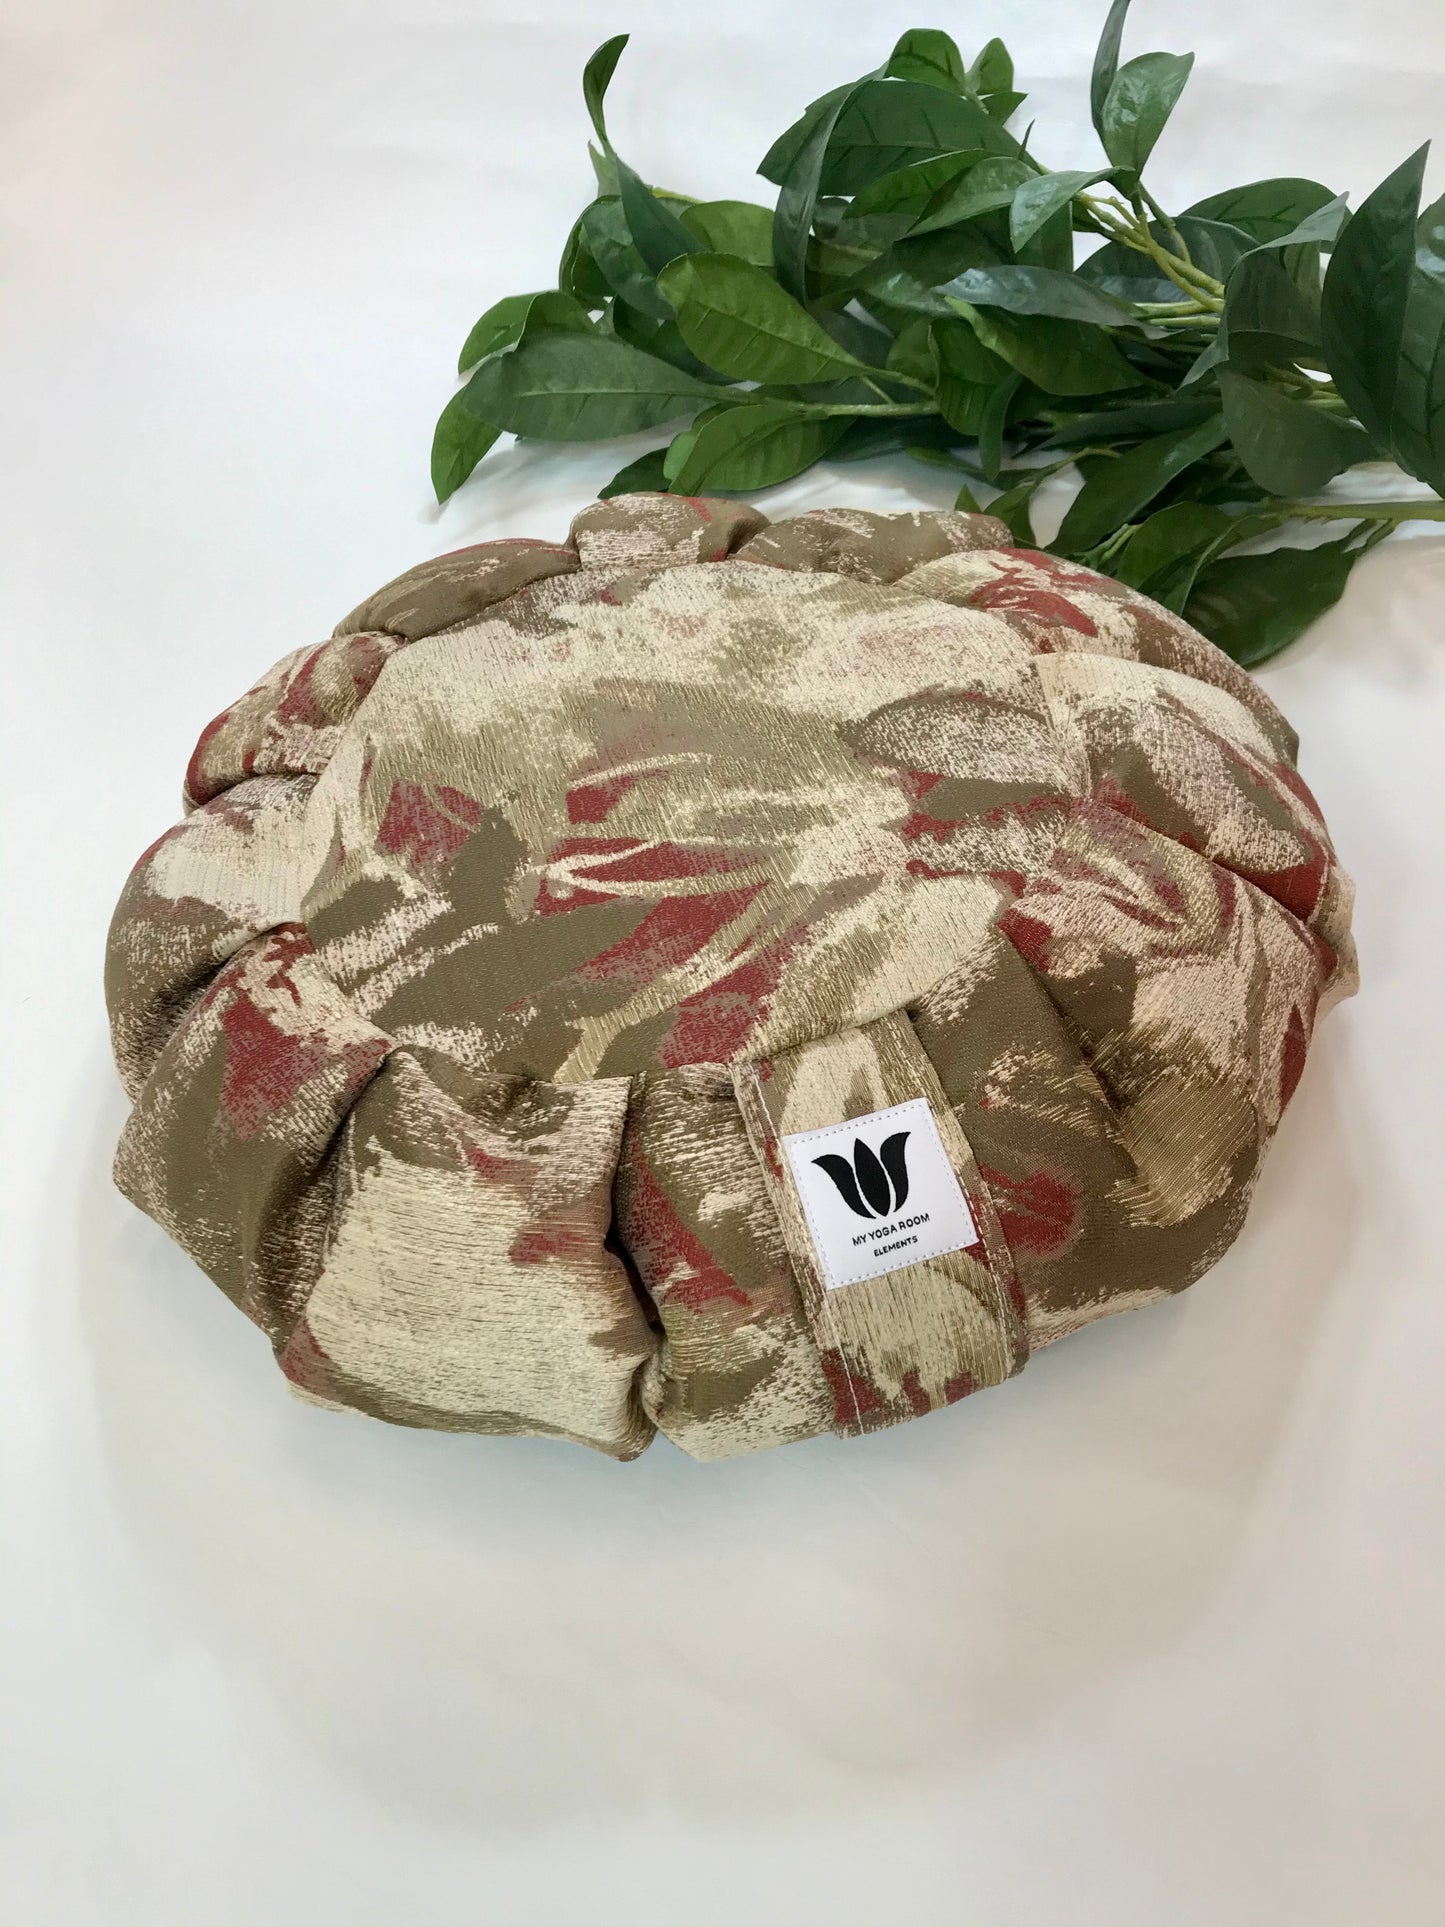 Handcrafted premium cotton sateen fabric meditation seat cushion in rich autumn water colour print fabric. Align the spine and body in comfort to calm the monkey mind in your meditation practice. Handcrafted in Calgary, Alberta Canada